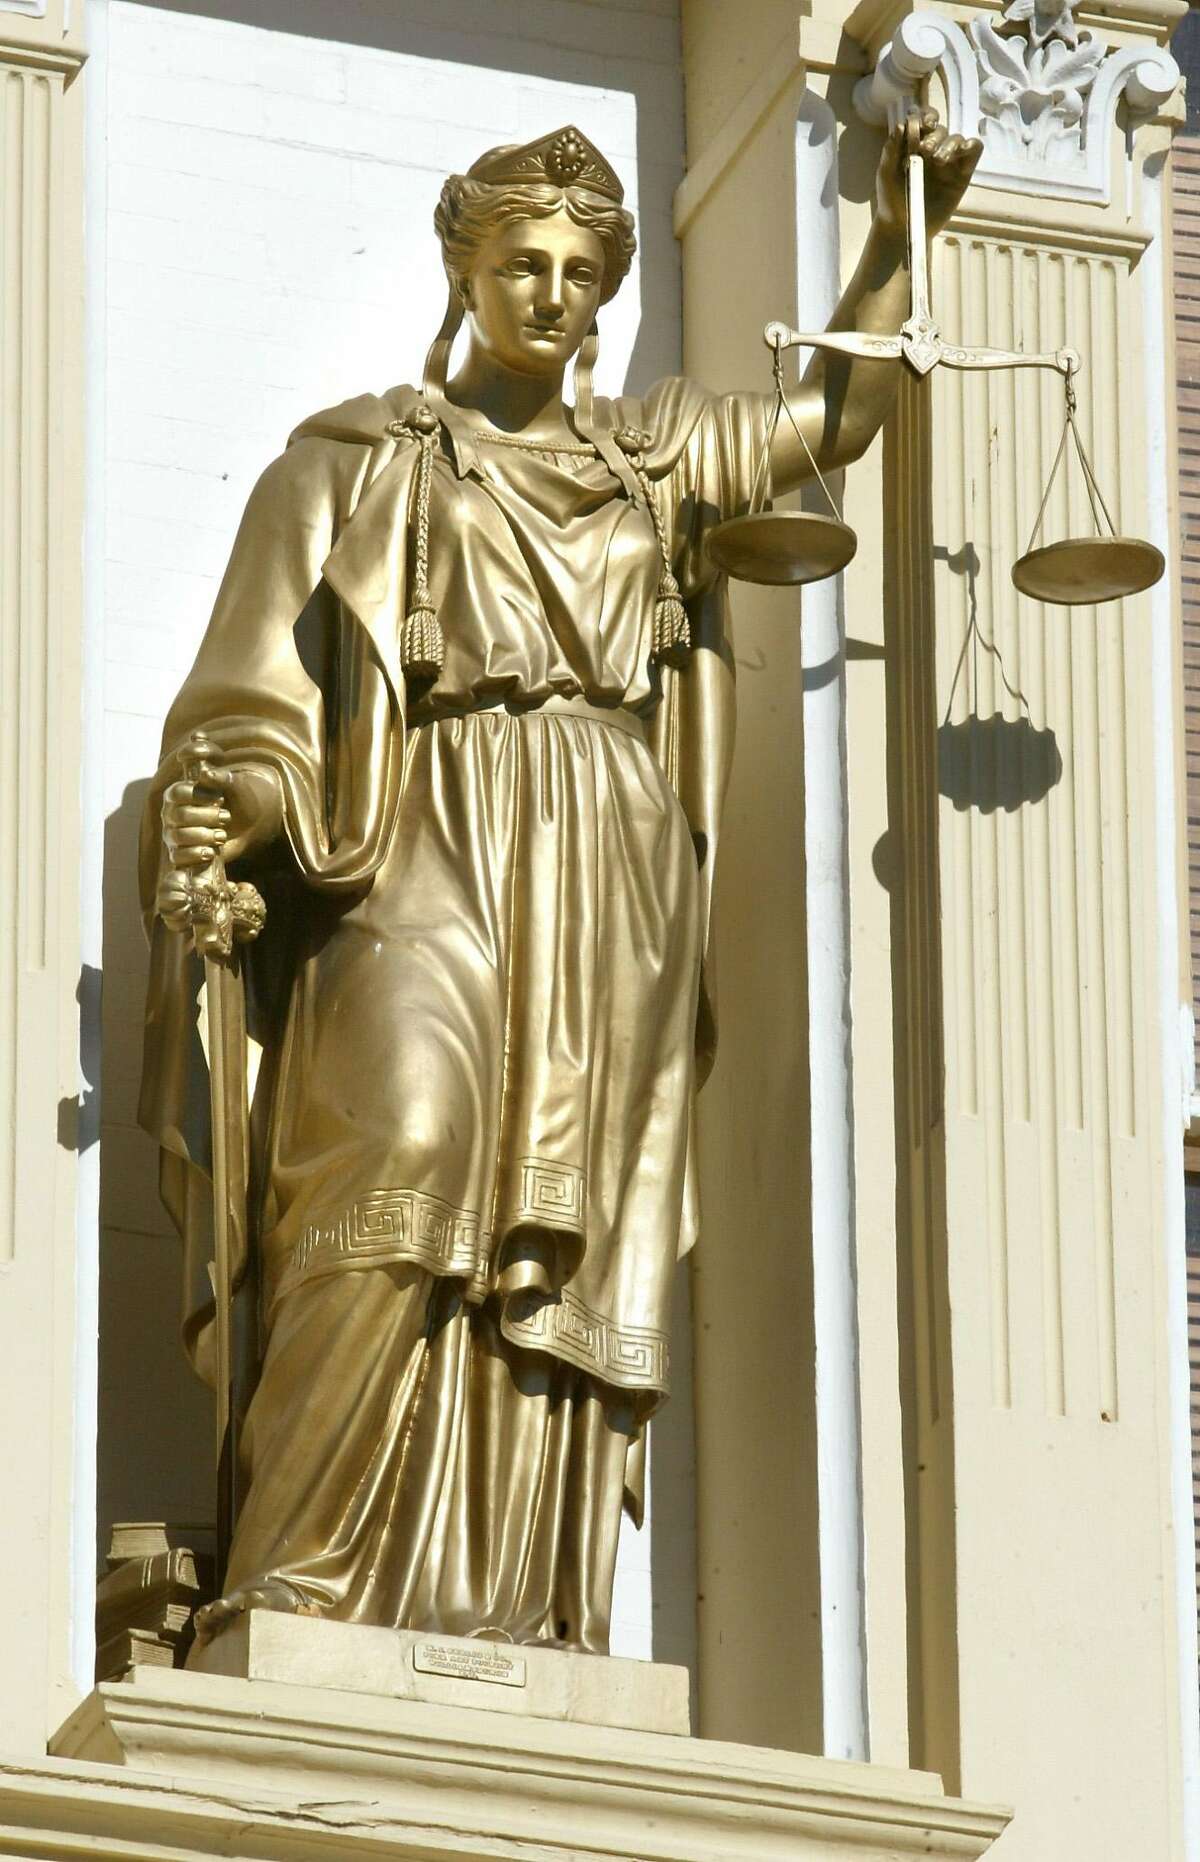 TRAVEL ** FILE **Justice is not blind in Virginia City, Nev. Bucking convention, the statue of Lady Liberty, who holds the Scales of Justice on the 1876 Washoe County Court House, wears no blindfold, seen in this June 2003 file photo. Virginia City stands today as the largest historic district in the United States. Much of the town is preserved and restored to the way it was when it was rebuilt from a consuming fire in 1875. (AP Photo/Orange County Register, Jebb Harris)